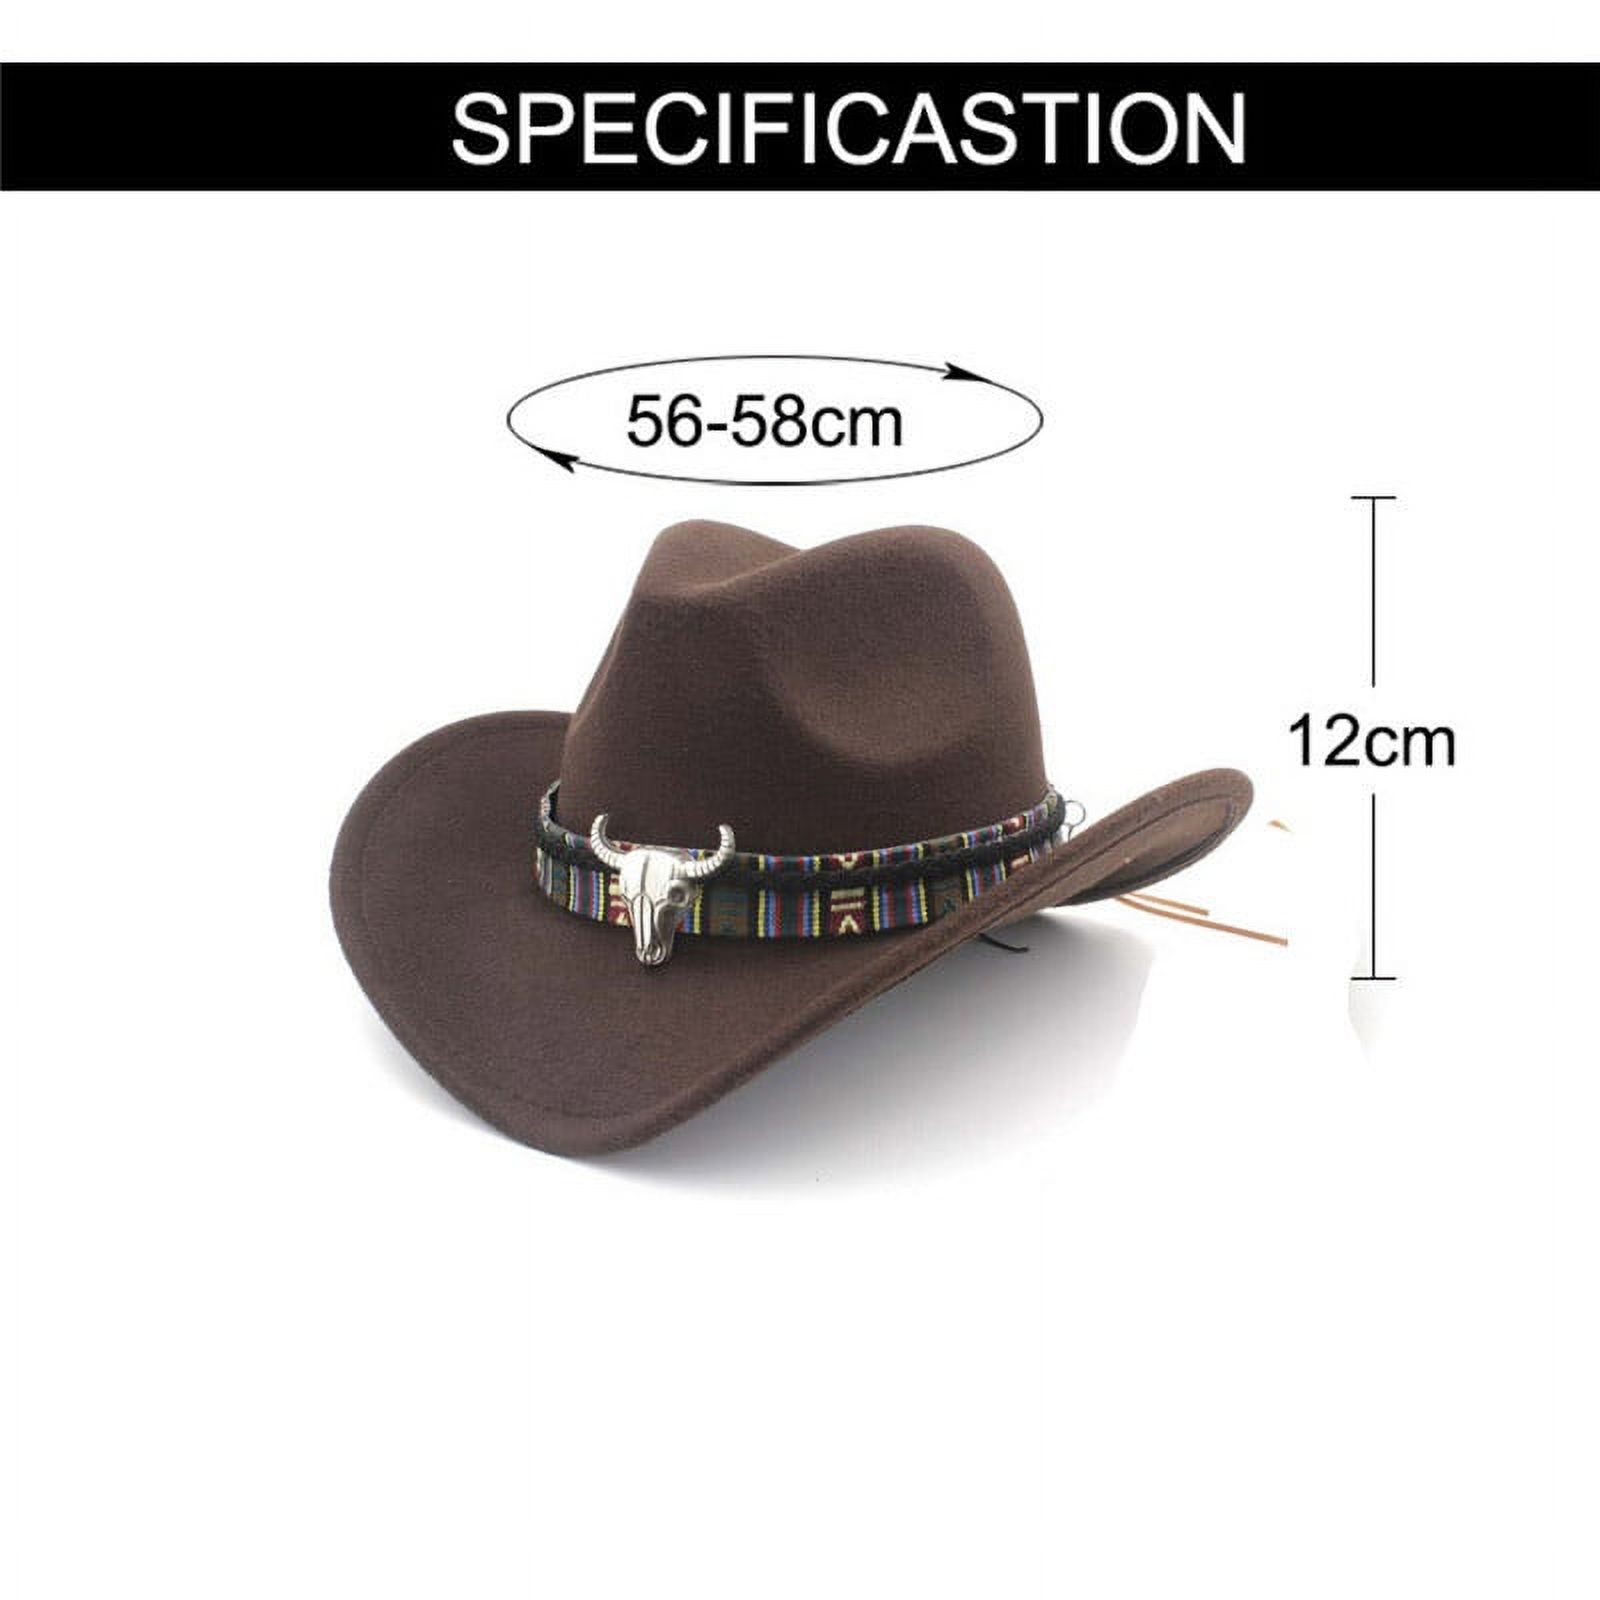 Outdoor Casual Fashion Personality hat Summer Spring Autumn Winter Wool Hat Women Men Ethnic Style Western Cowboy Hat for Lady Tassel Felt Cowgirl Sombrero Caps Travel Sun Hat Wild hat - image 2 of 8